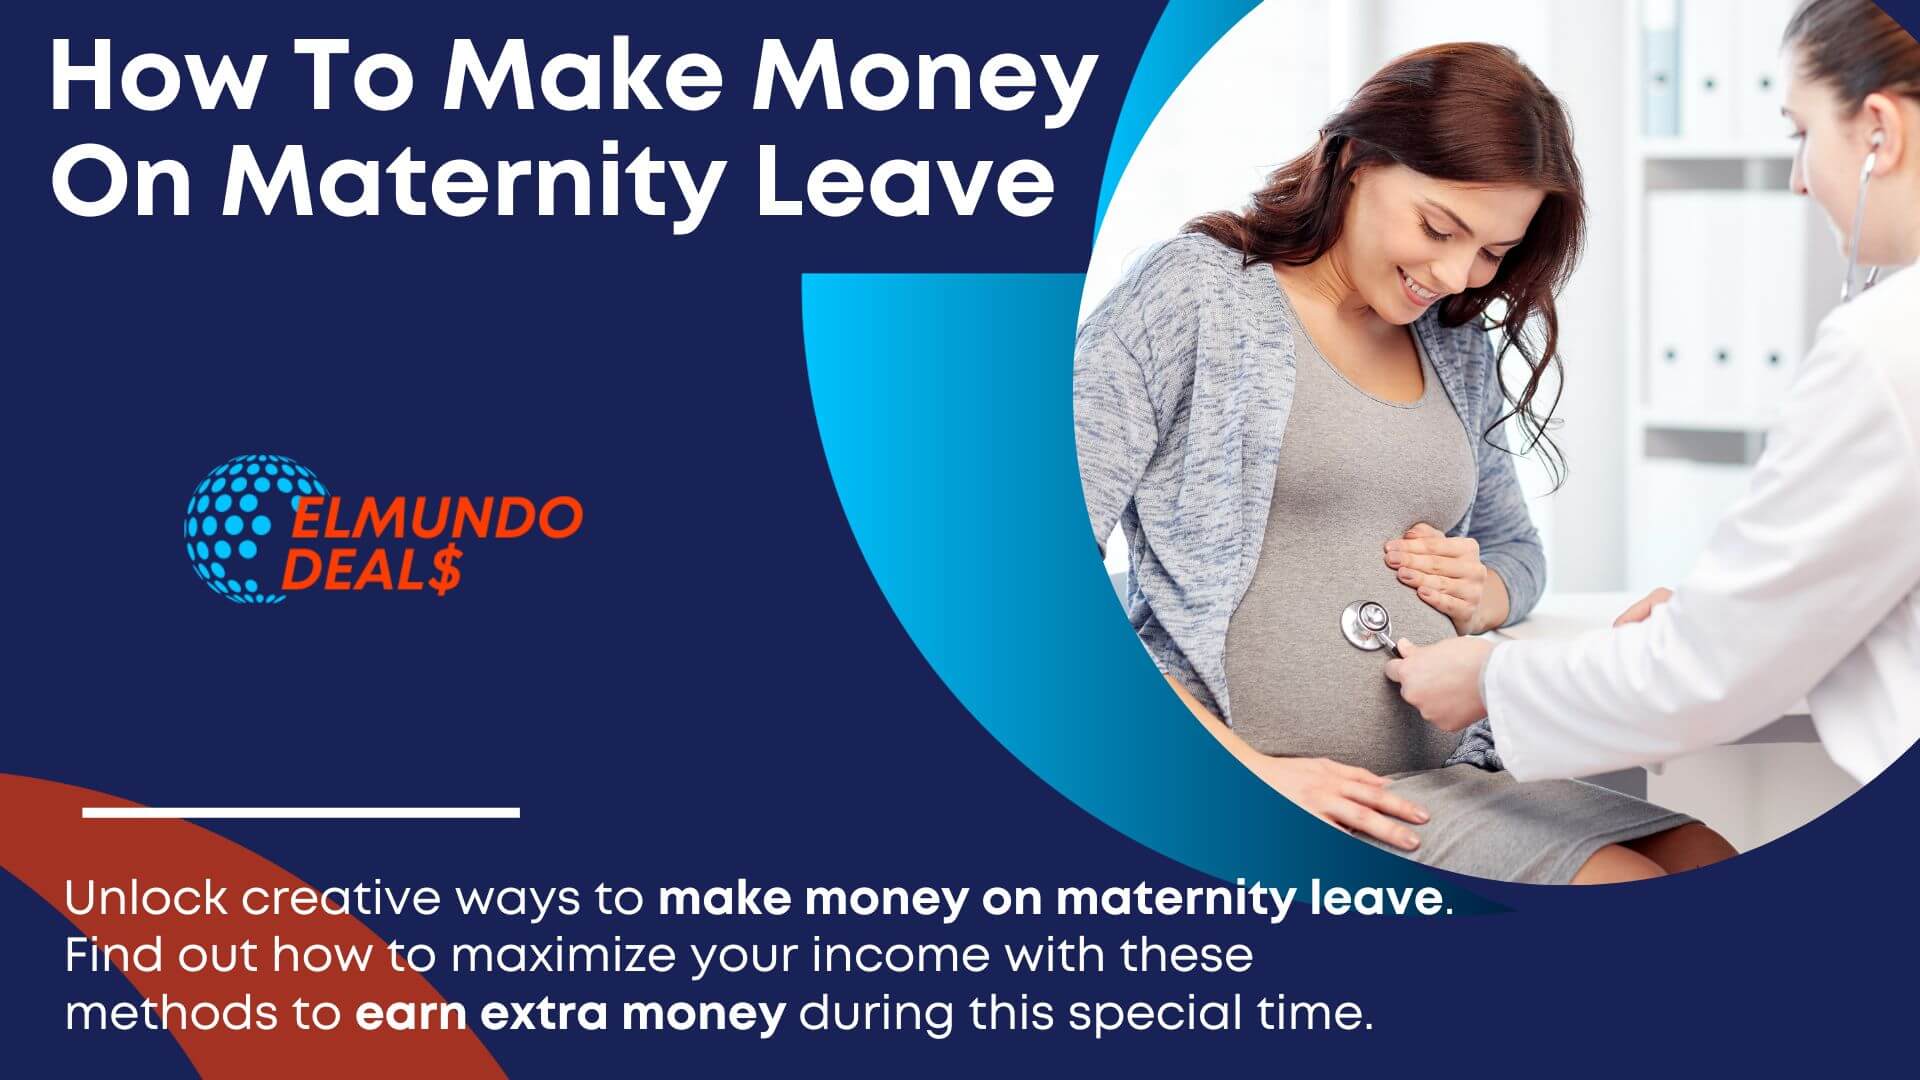 How To Make Money On Maternity Leave: 11 Creative Ways